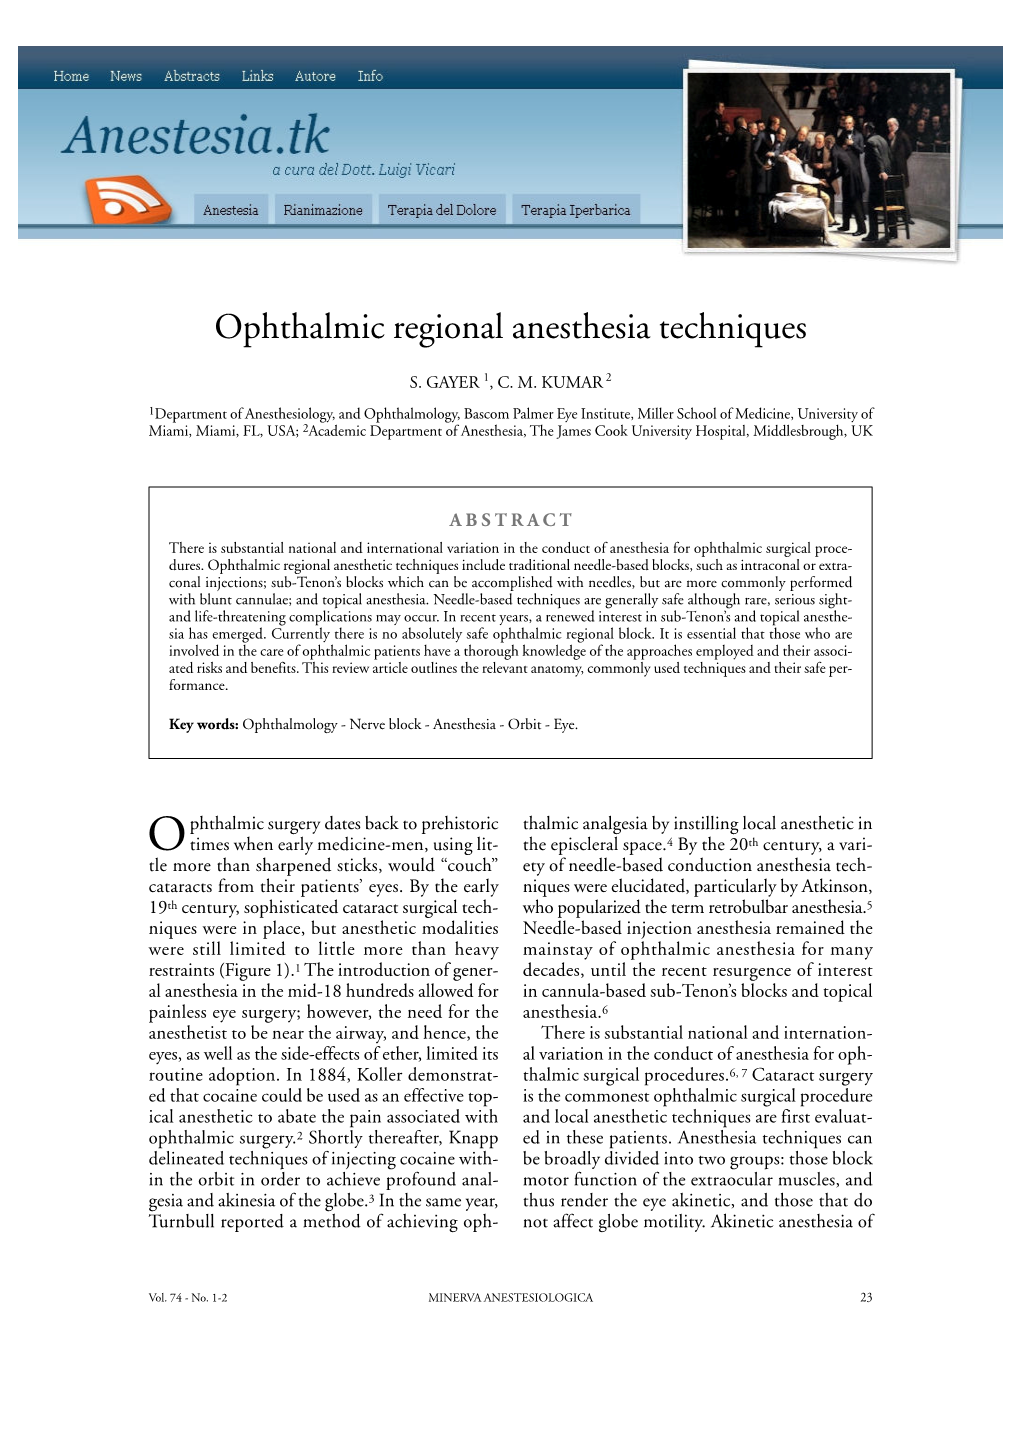 Ophthalmic Regional Anesthesia Techniques